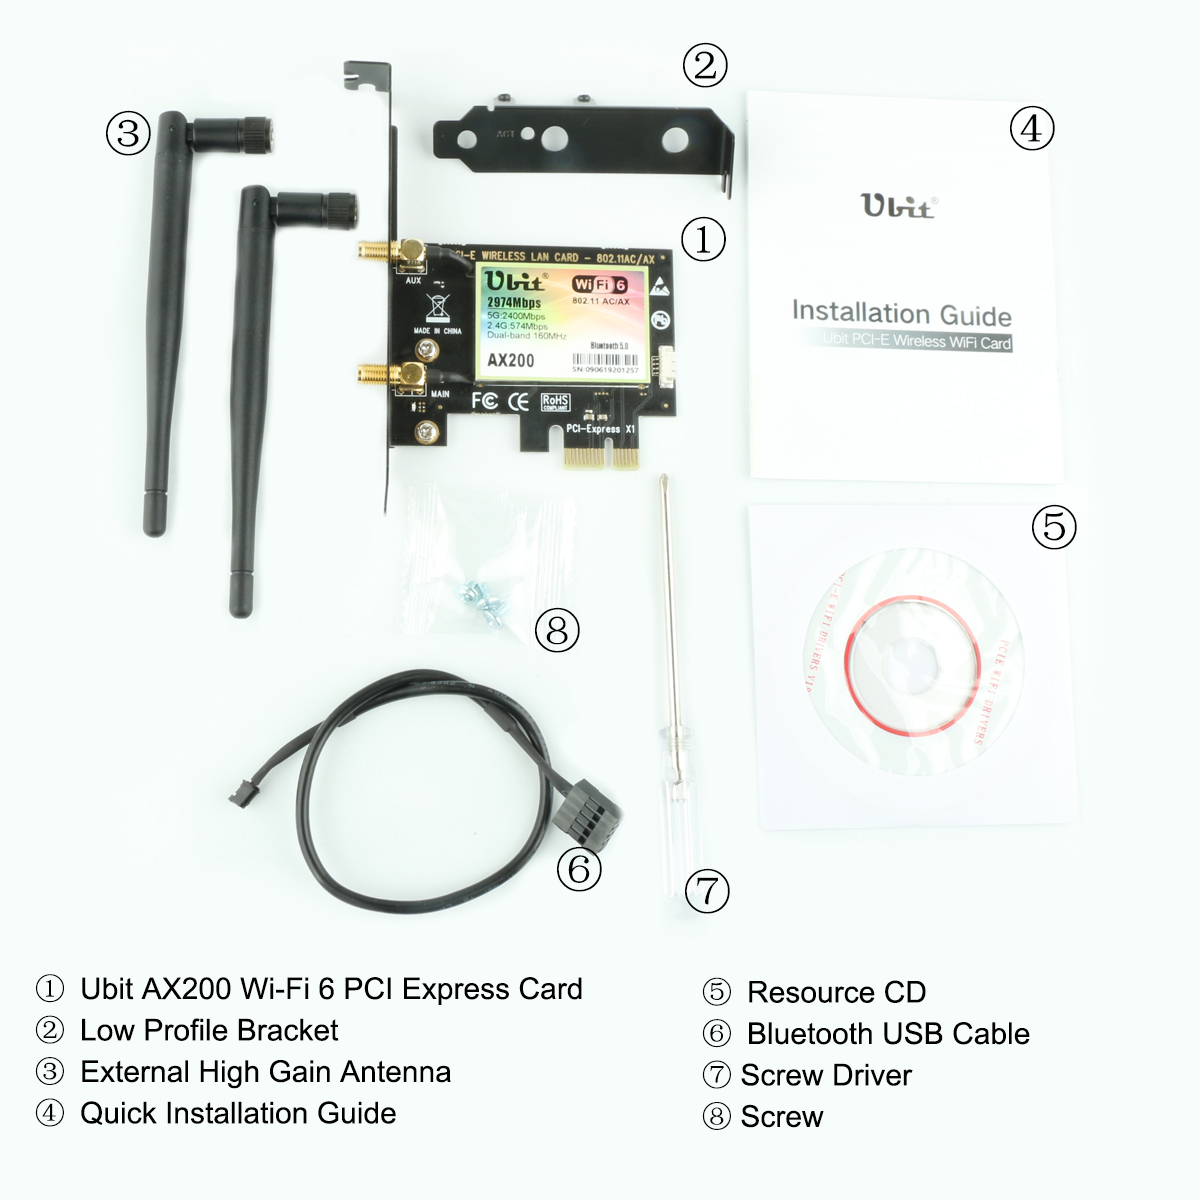 1200Mbps Wireless Network Adapter Cudy AC1200 High Gain Dual Band PCIe WiFi Card for PC Compatible with Windows 7/8.1/10. External Antenna 5Ghz/2.4Ghz Include Low Profile Bracket 